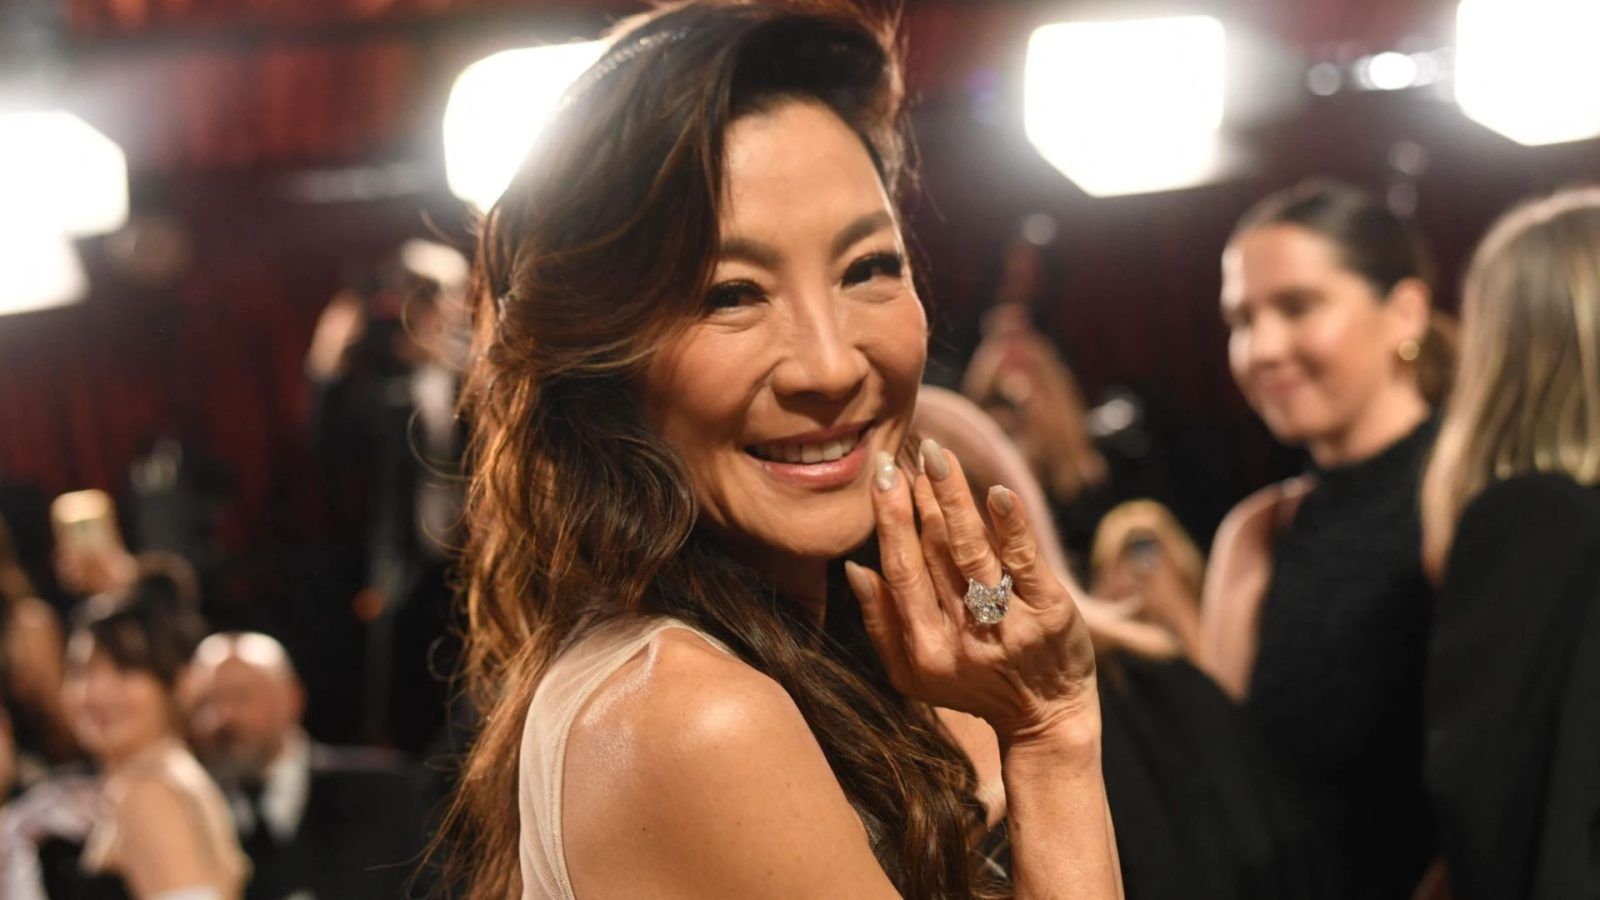 Michelle Yeoh net worth and expensive things she owns